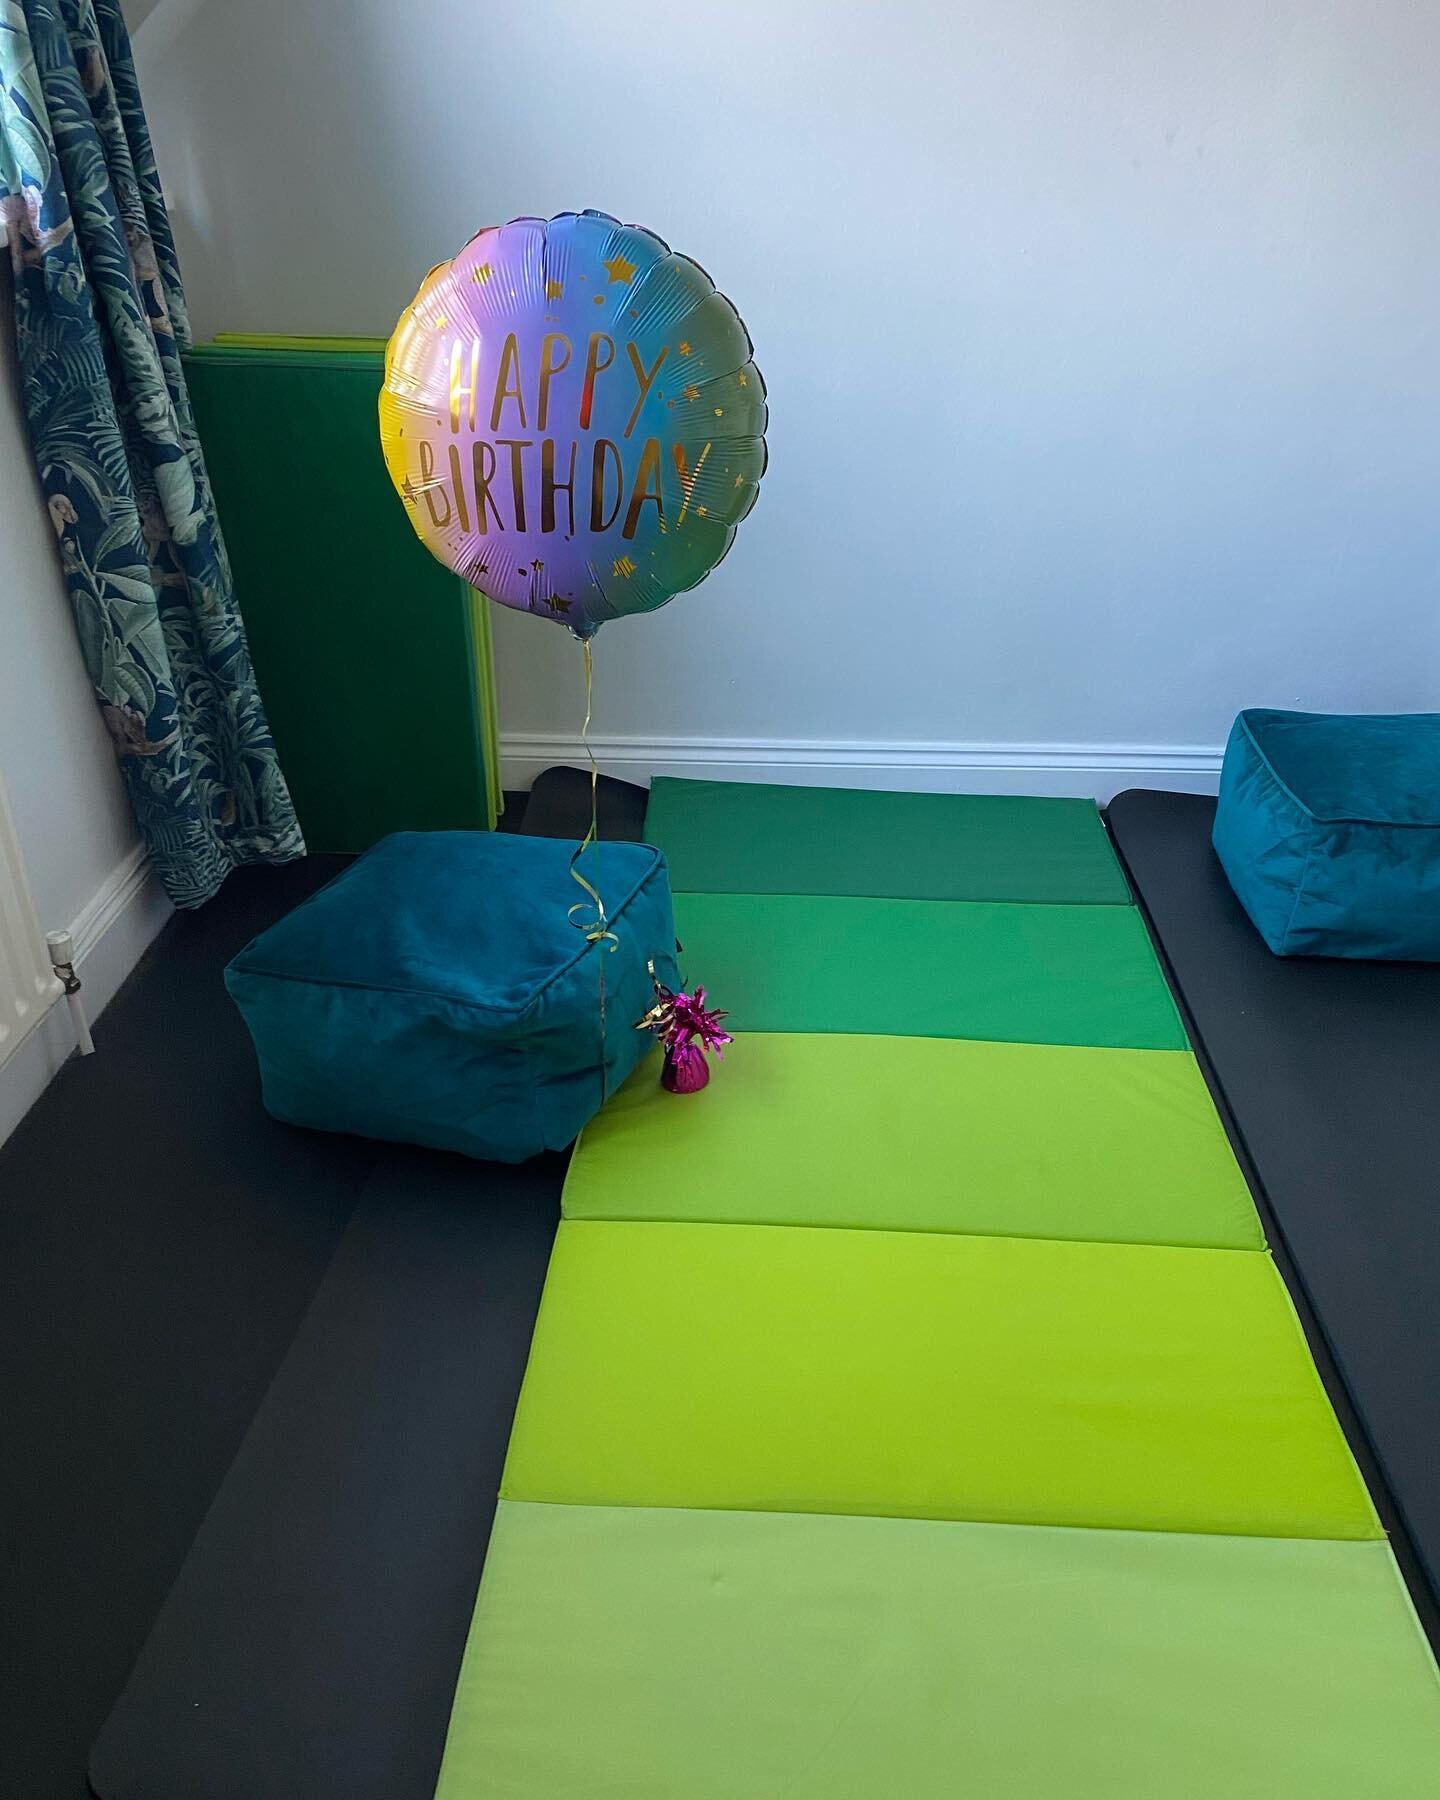 When your client celebrates their birthday by doing a morning Kambo session! 

What an awesome way to kick start your birthday year. Letting go of the old and making space for the new. Just awesome. 

#kambo #happybirthday #frogmedicine #thekamboclin